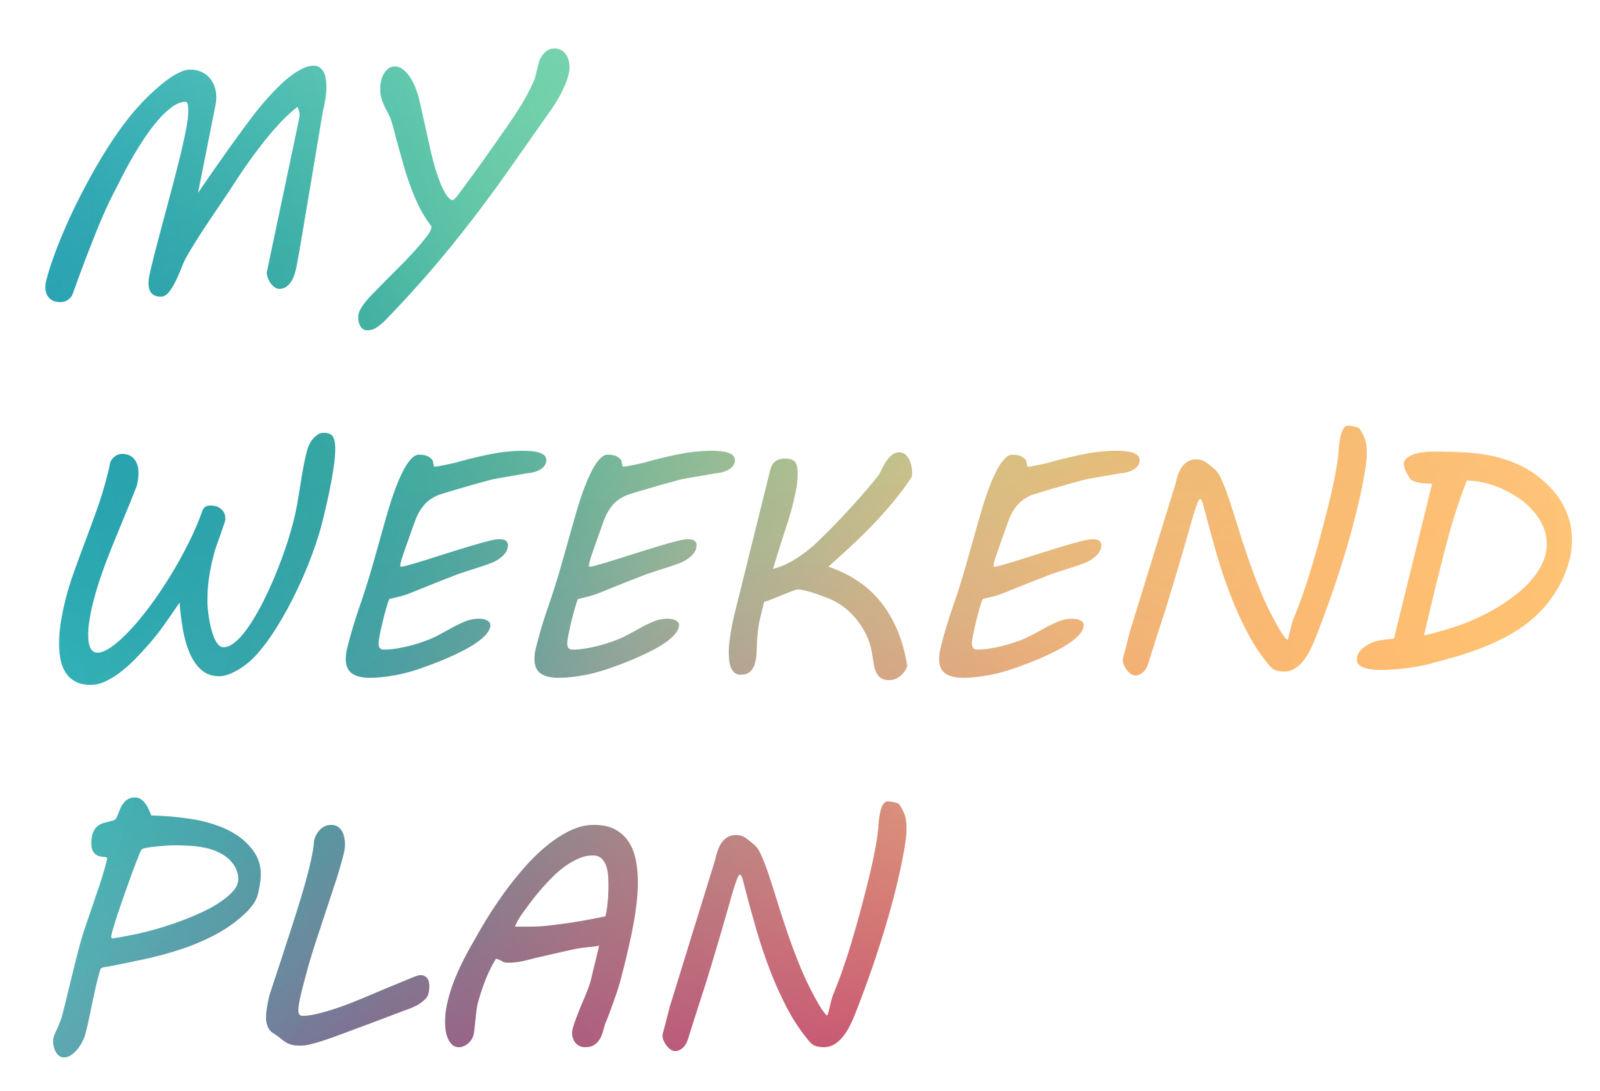 What are you do last weekend. My ideal weekend проект. My weekend Plans. Картинки weekend Plan. Weekend английский язык.